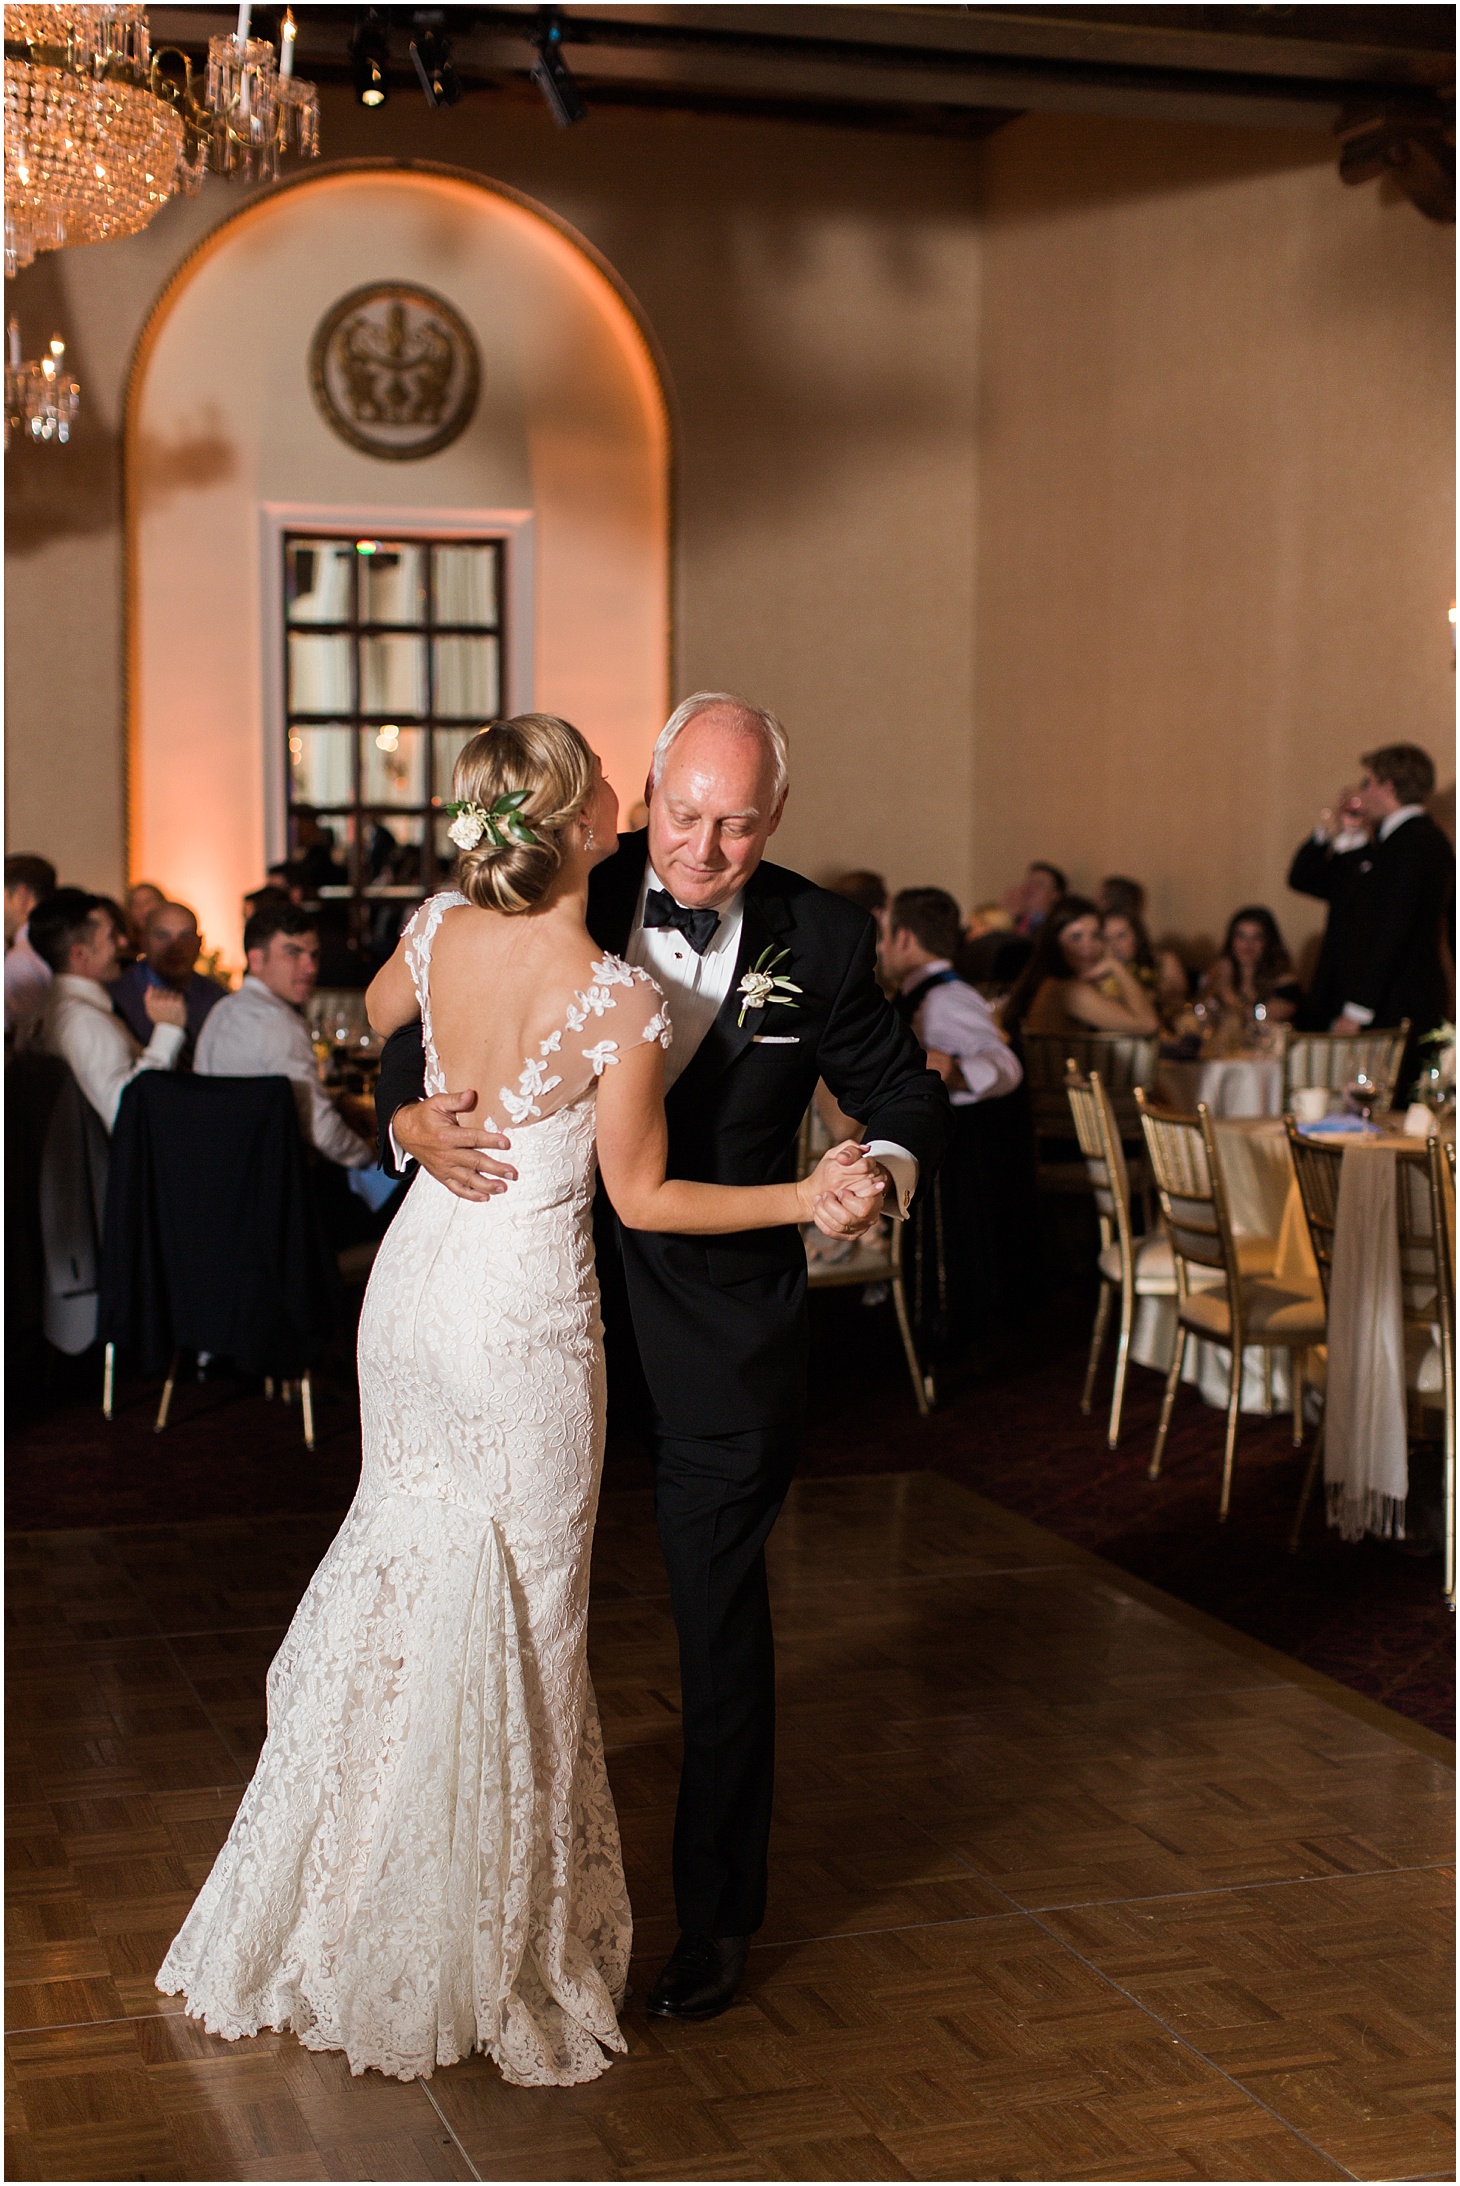 Father-Daughter Dance at the St. Regis Washington, DC Wedding Reception | Southern Black Tie Wedding in Dusty Blue and Ivory | Sarah Bradshaw Photography